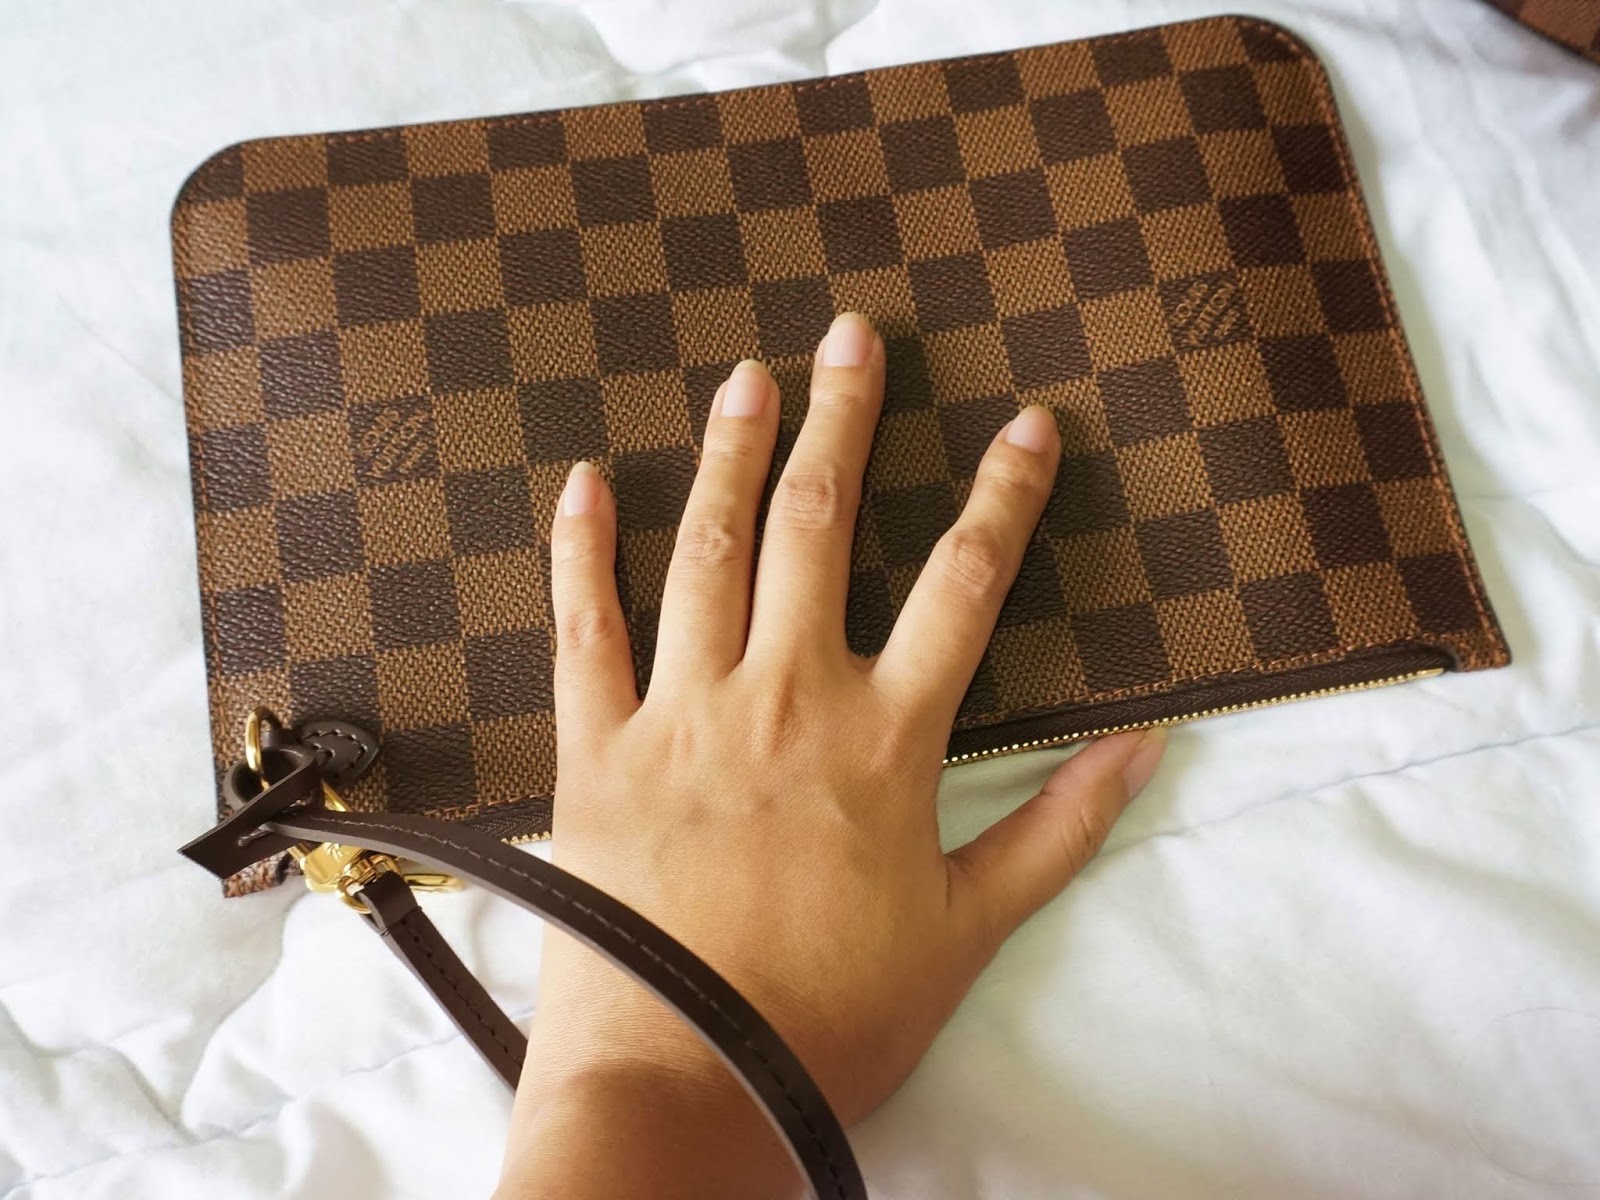 I just love the neverfull especially in the damier ebene print. What i